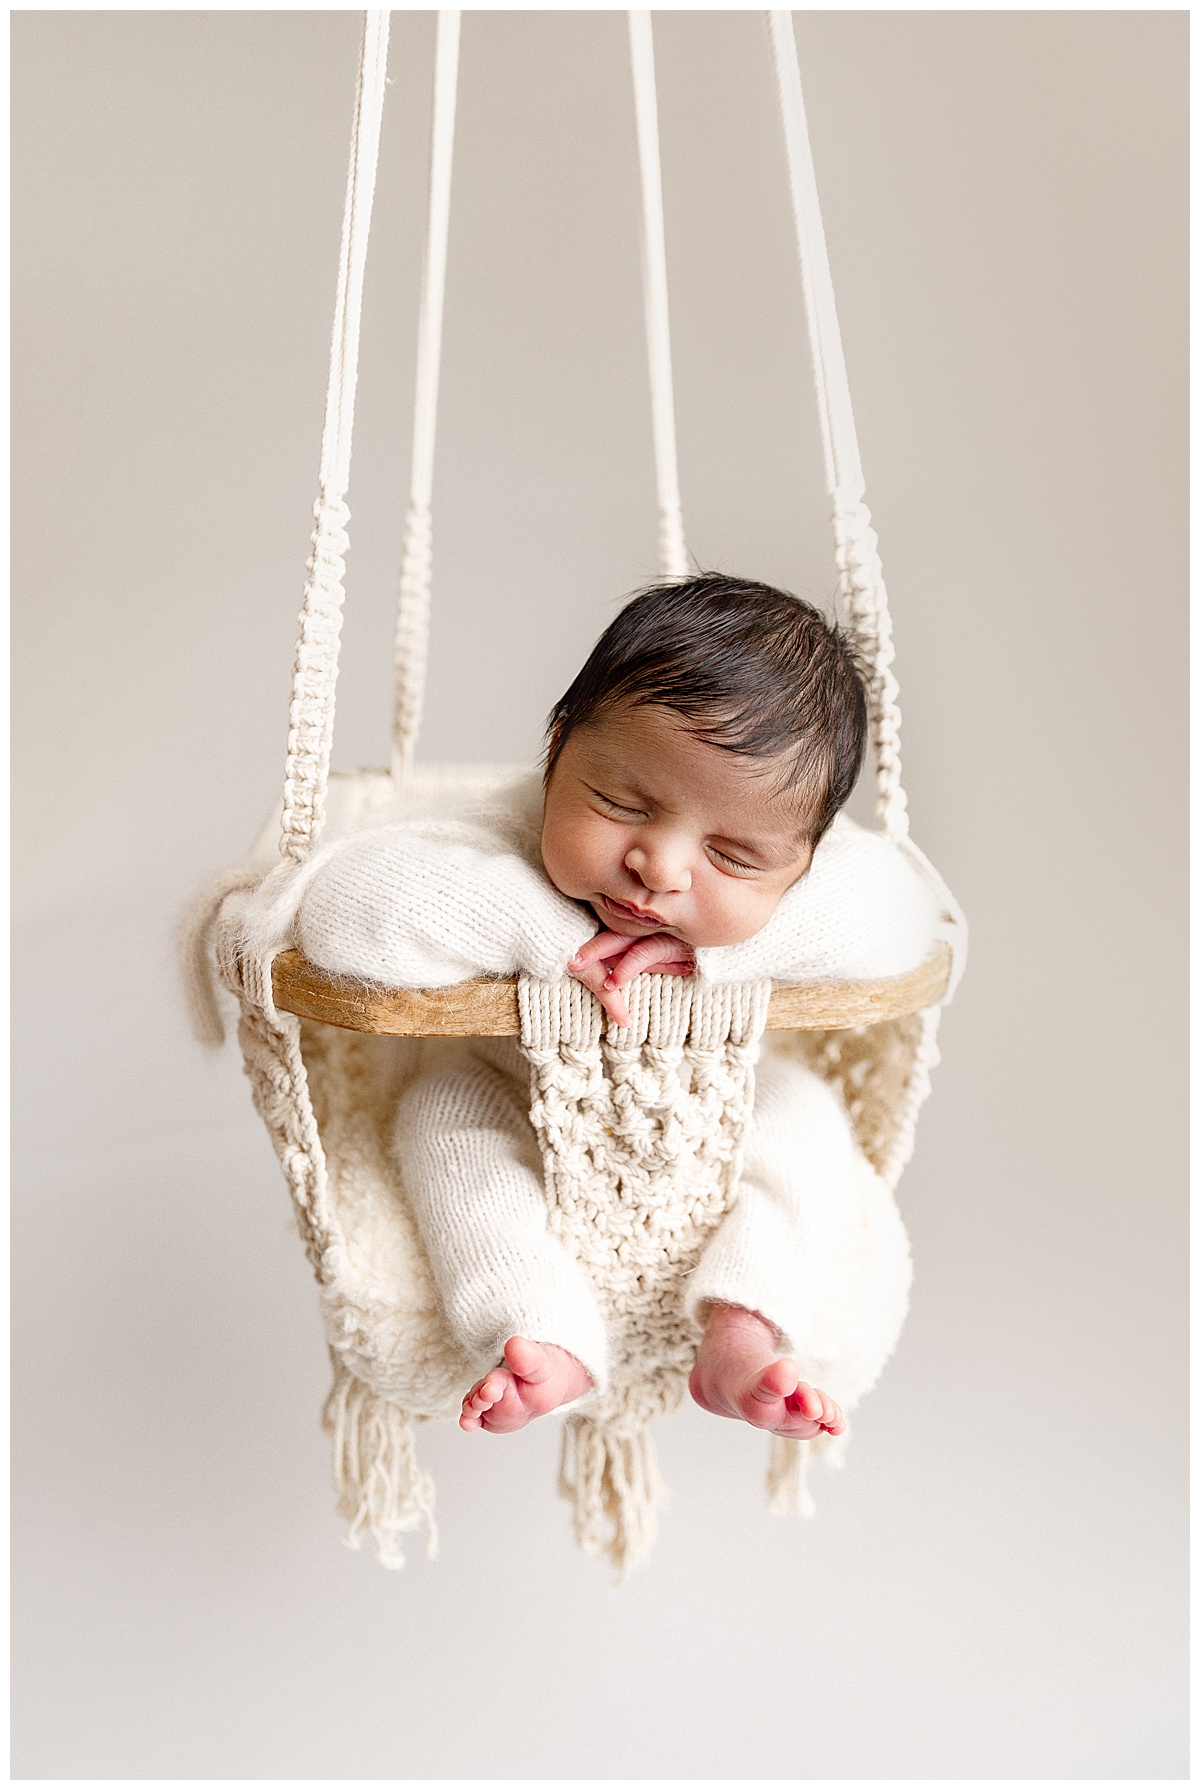 Young baby in swing for Norma Fayak Photography